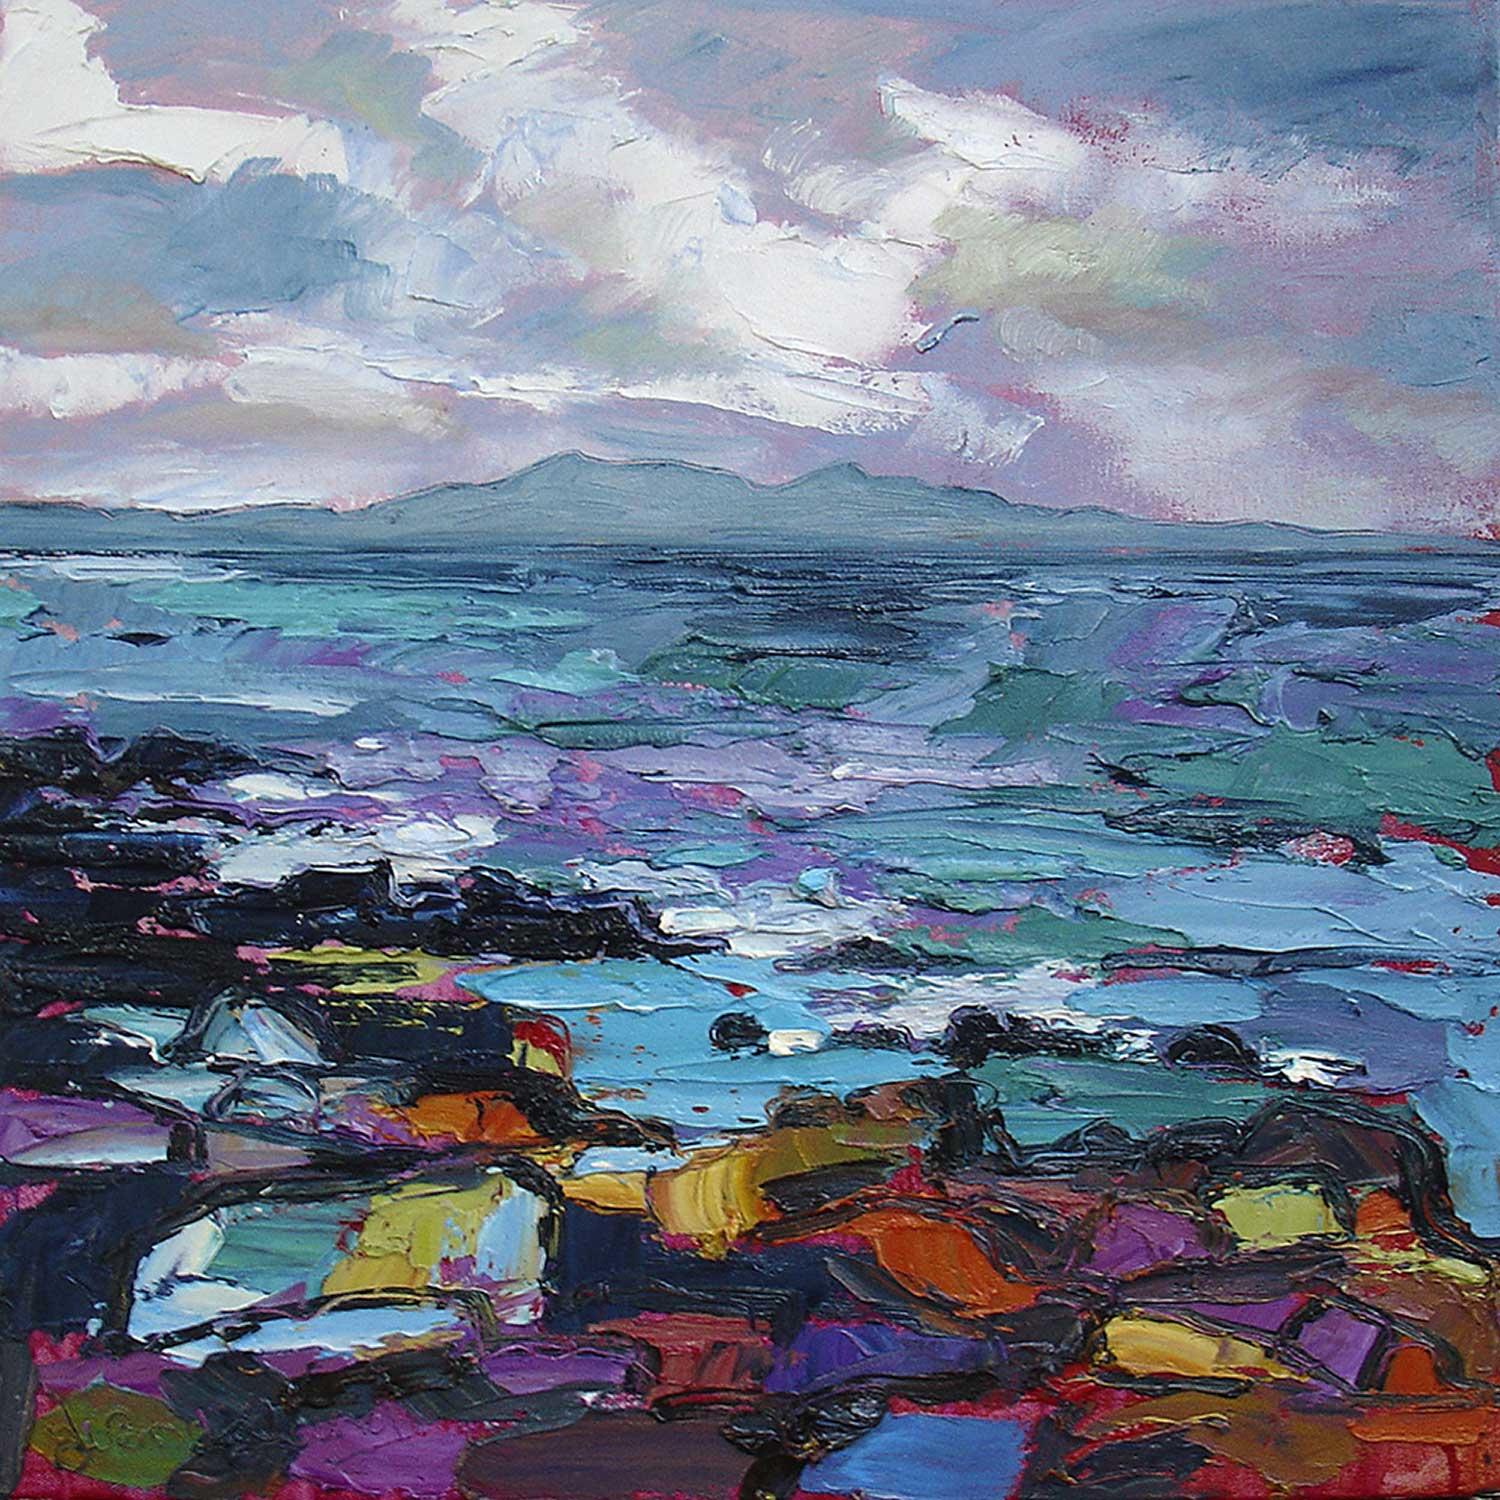 Stormy Weather, Arran in the Distance by Judith I Bridgland